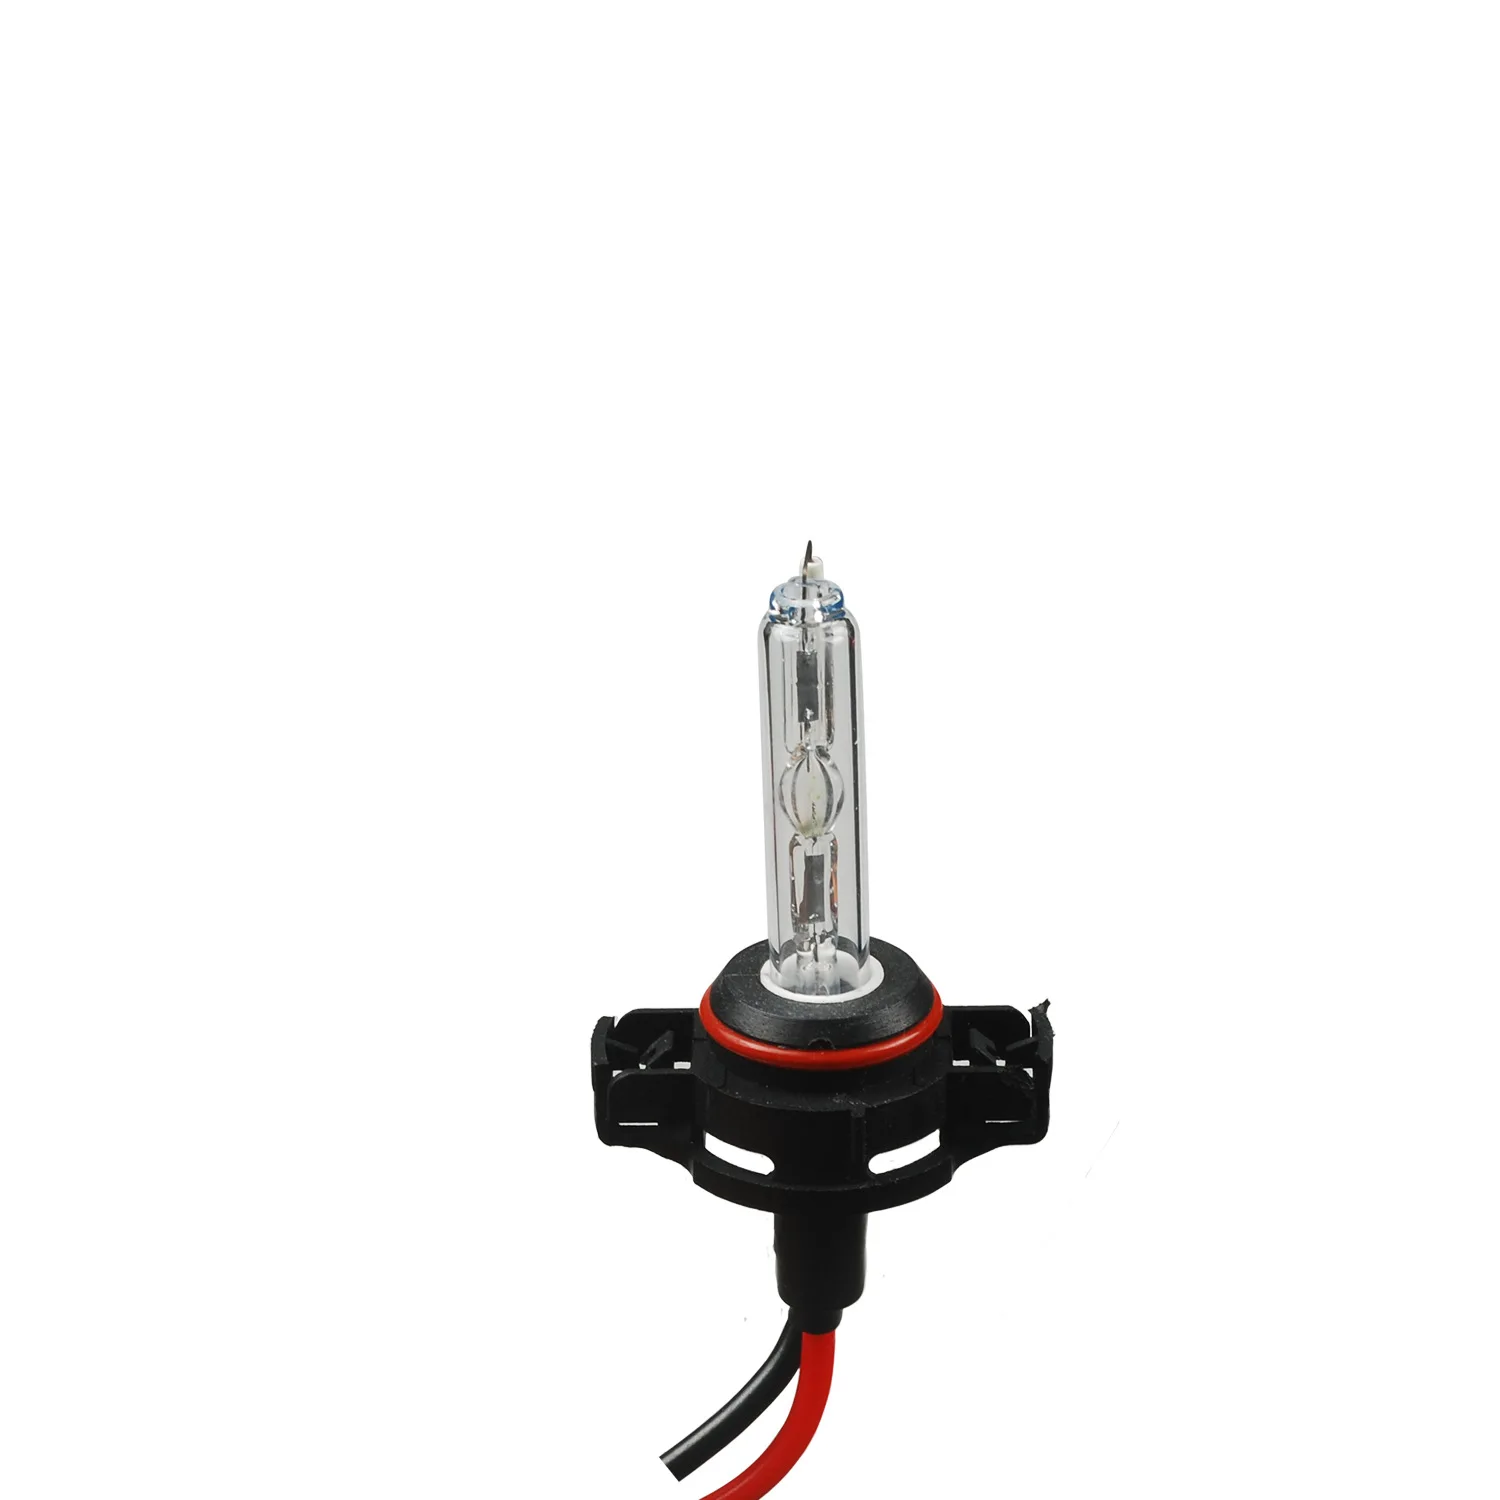 HID Automobile Bulb Manufacturers Accessories Wholesale 5202 Xenon Lamp H16 Xenon Lamp America Pickup Truck Only